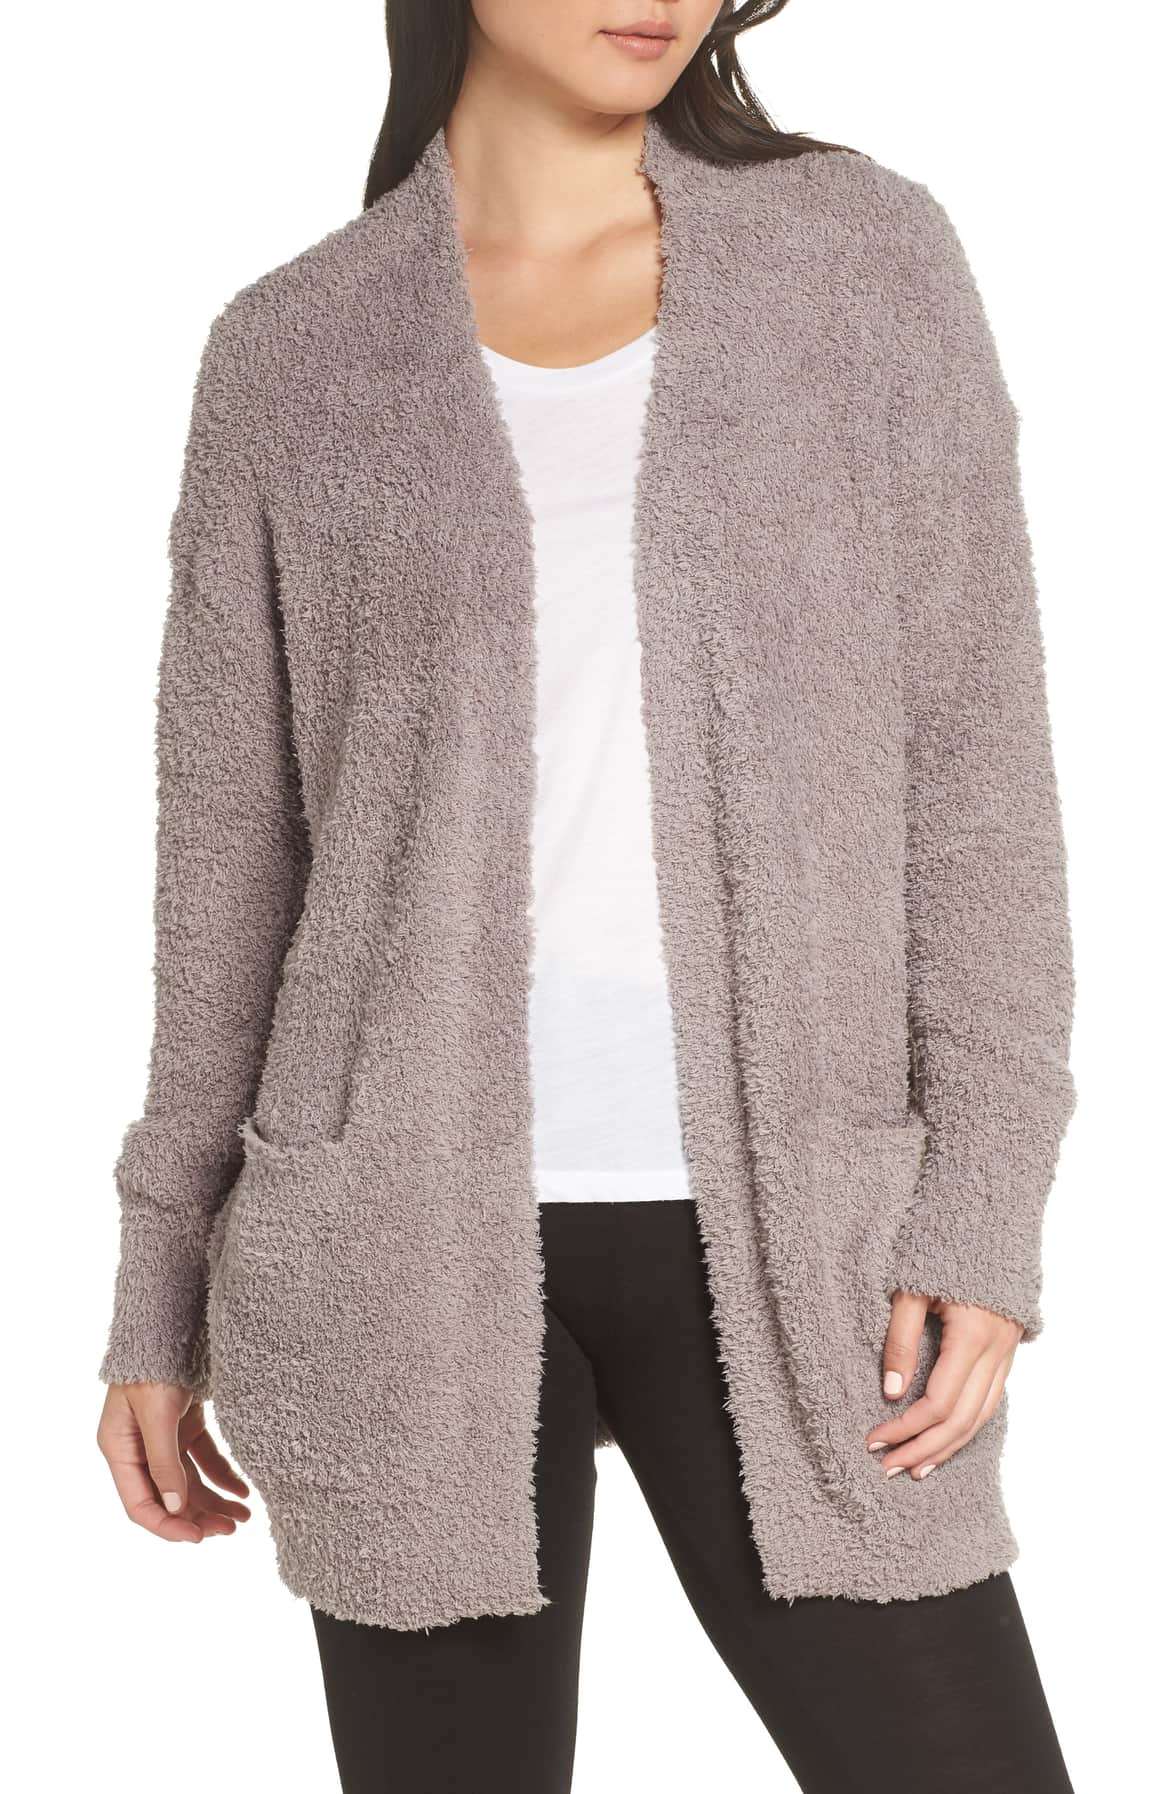 Nordstrom Sale: Shop the Barefoot Dreams CozyChic Cardigan